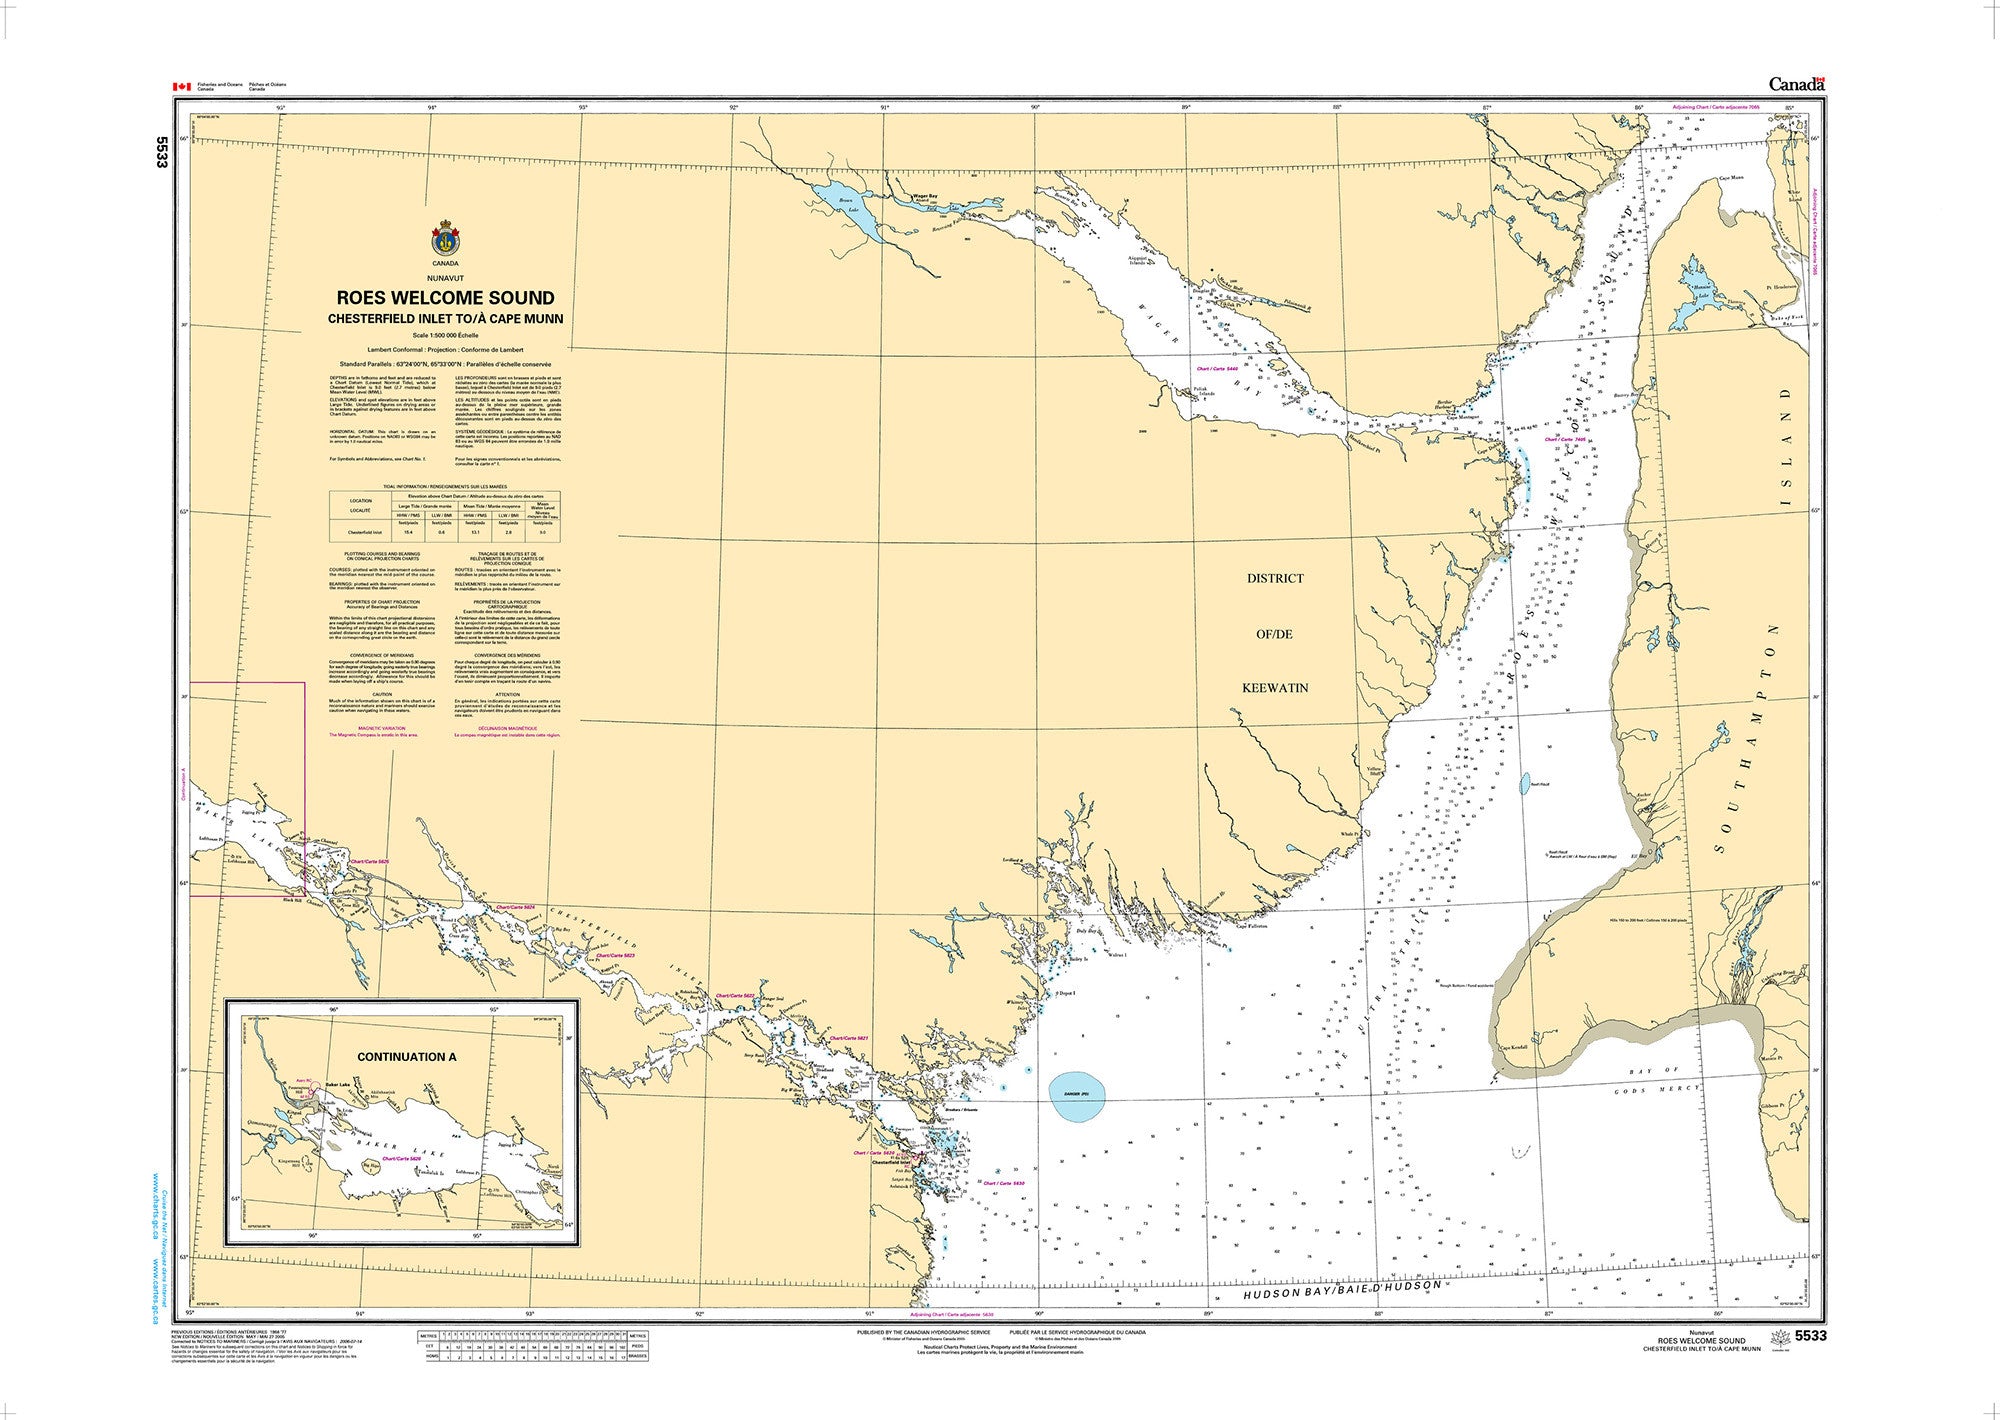 Canadian Hydrographic Service Nautical Chart CHS5533: Roes Welcome Sound (Chesterfield Inlet to/à Cape Munn)